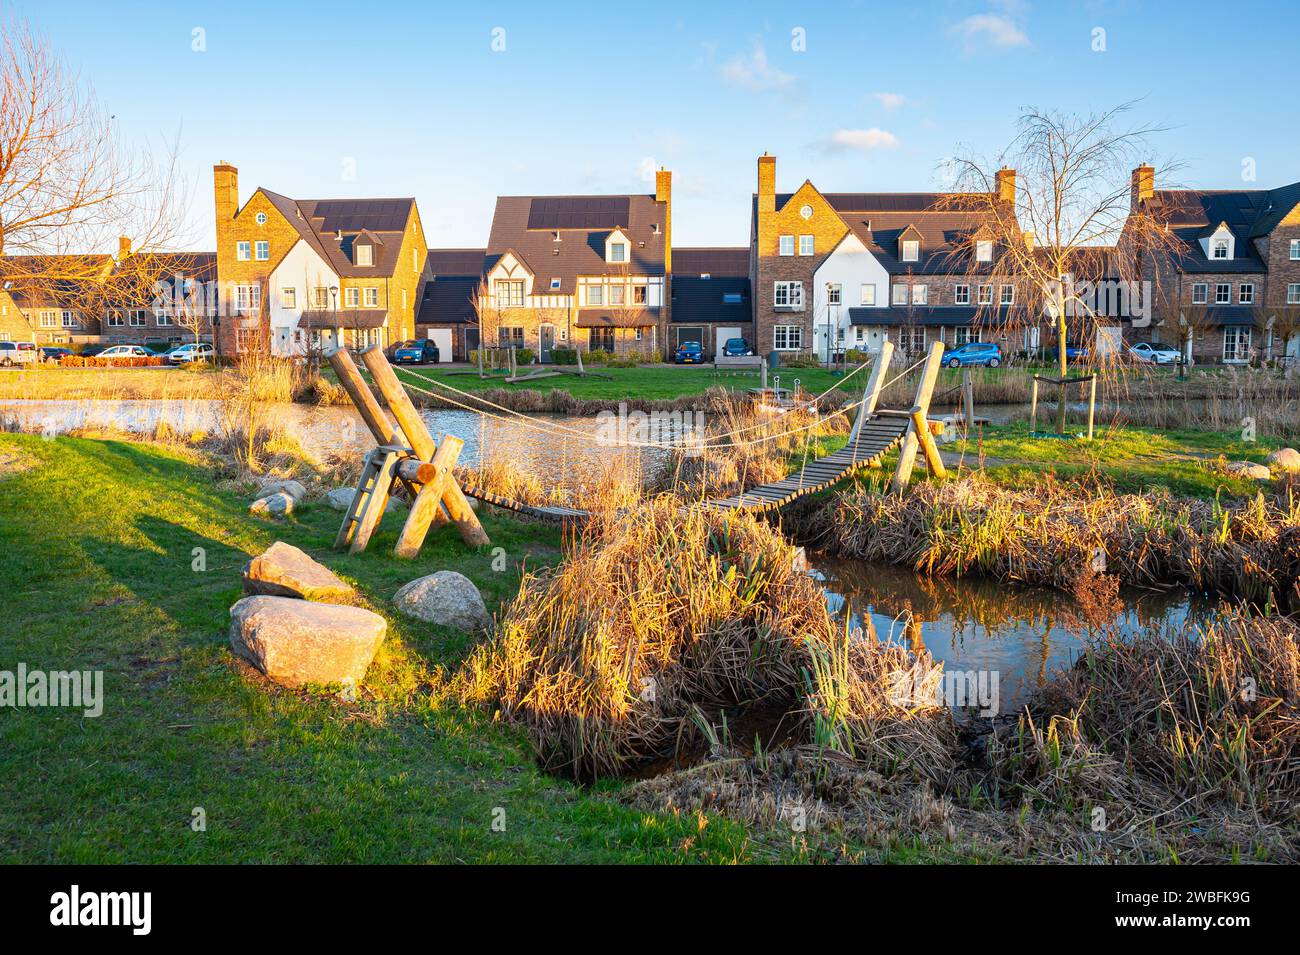 Small water playground in new housing development 'Triangel' in Waddinxveen, Netherlands on a sunny day in winter. Stock Photo